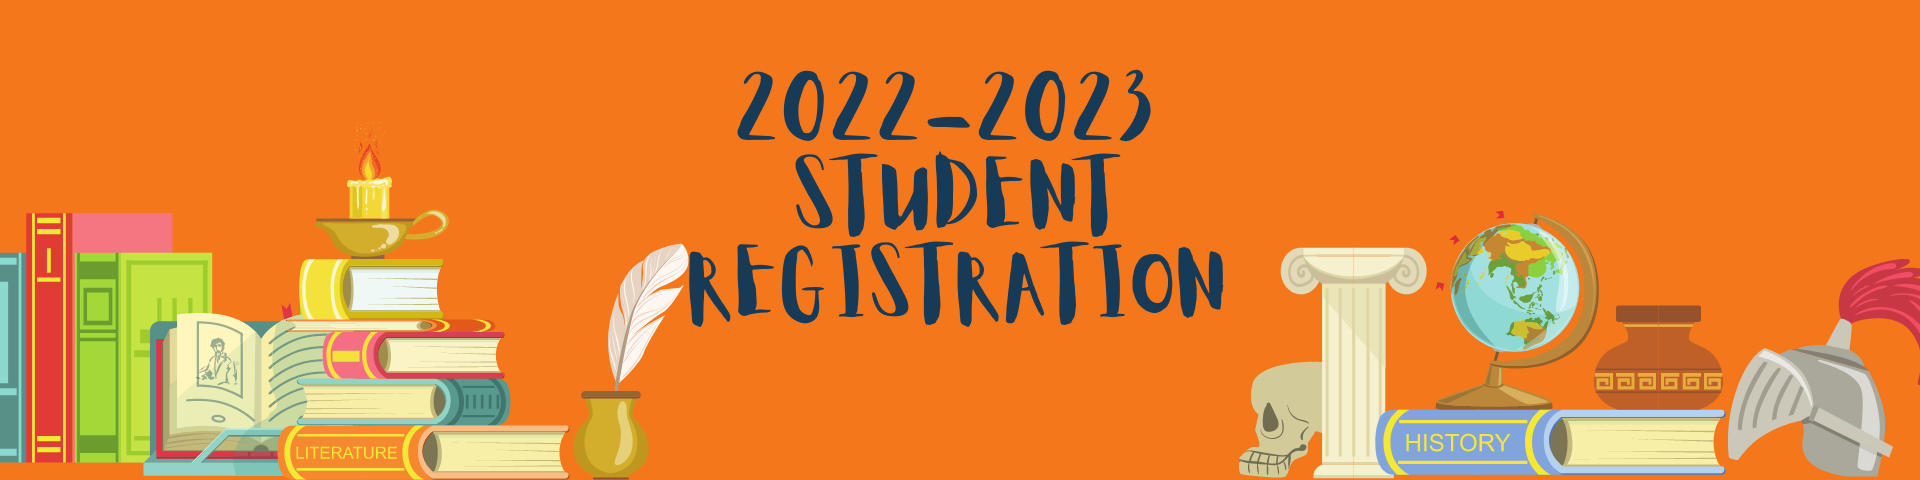 this is a stock image for student registration 2022-2023